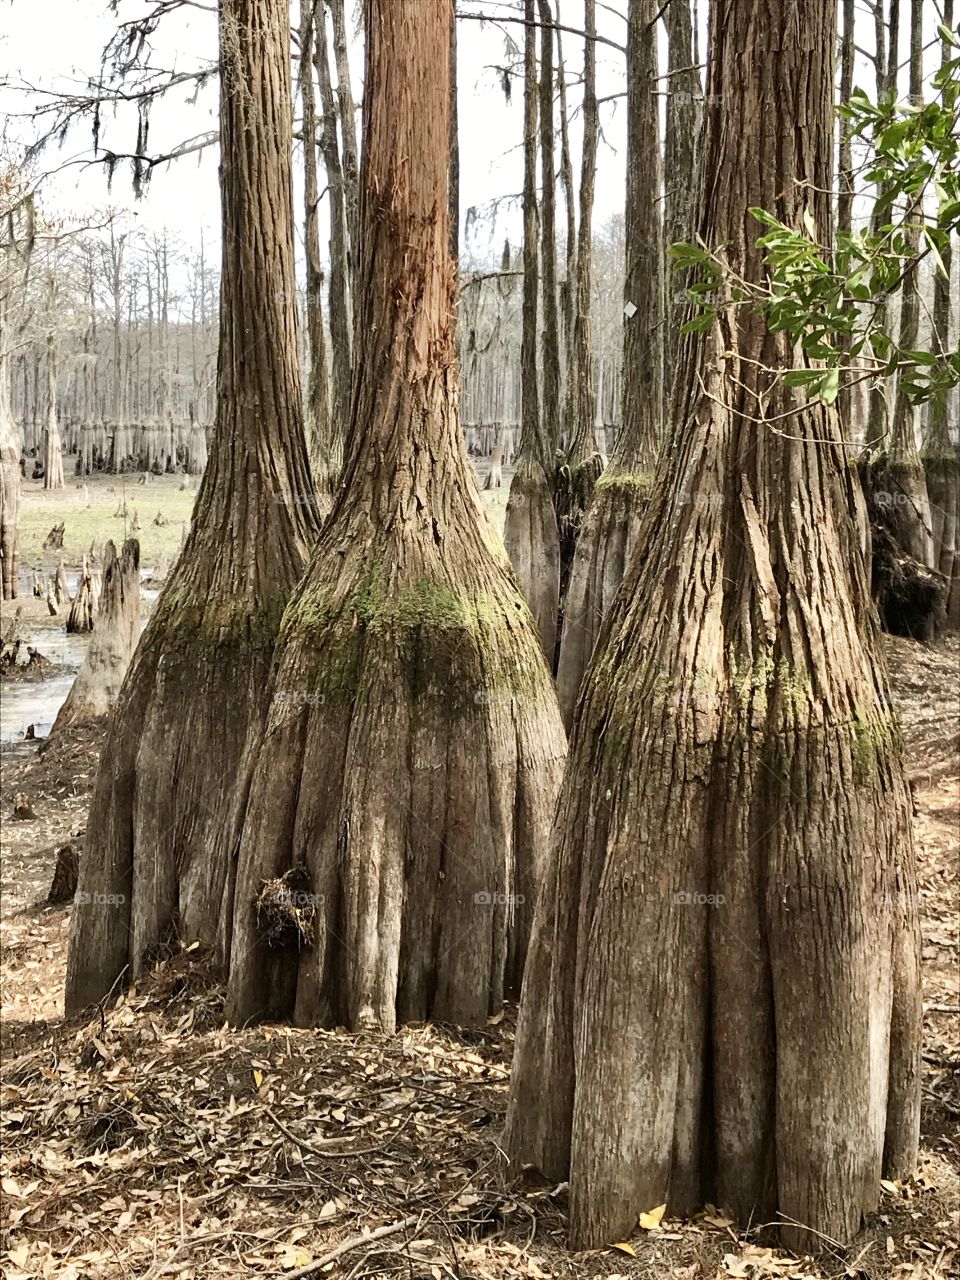 Cypress Trees in a drained lake with pollen rings where the lake level usually is